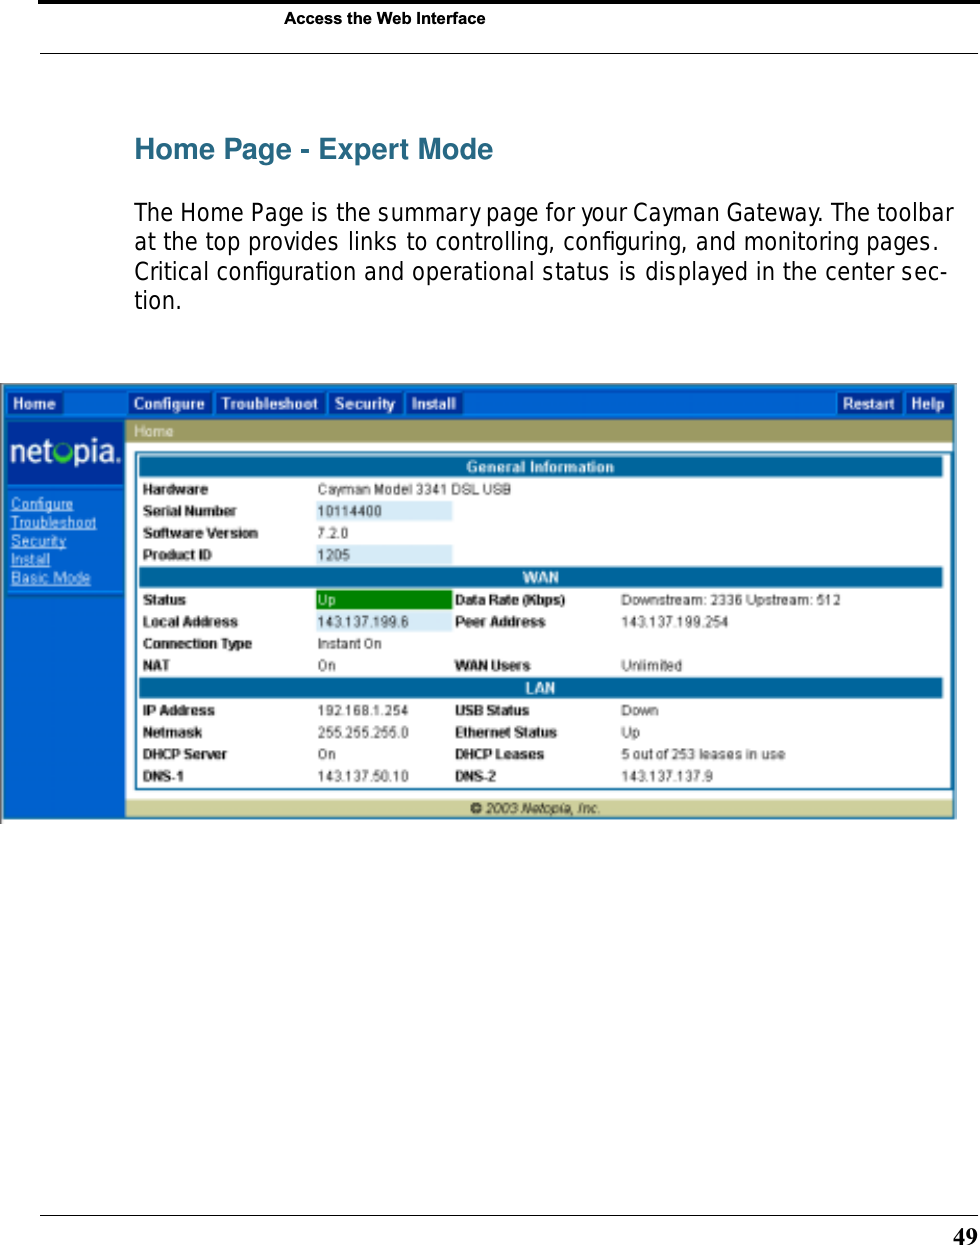 49Access the Web InterfaceHome Page - Expert ModeThe Home Page is the summary page for your Cayman Gateway. The toolbar at the top provides links to controlling, conﬁguring, and monitoring pages. Critical conﬁguration and operational status is displayed in the center sec-tion. 